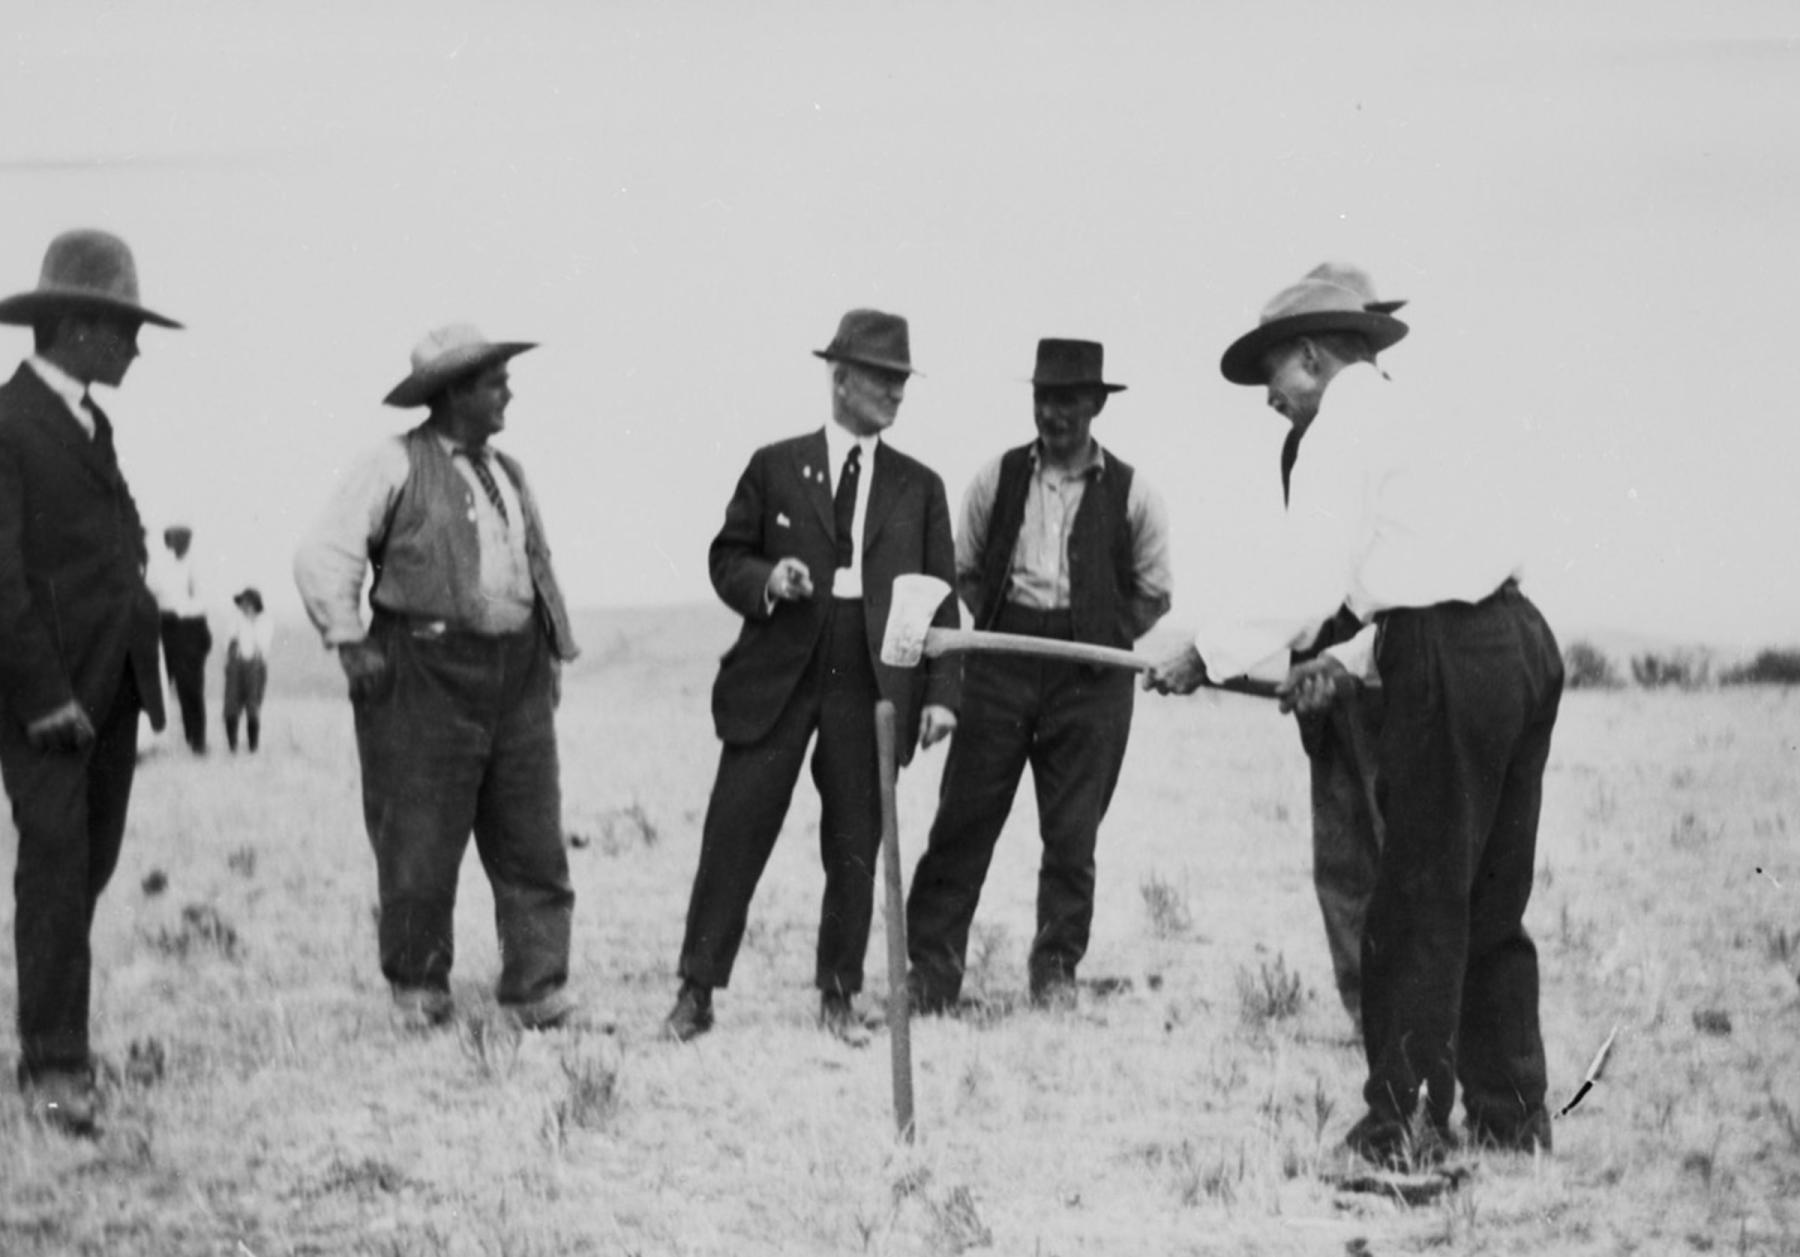 Local history buff Charles Bezold drives an old broomstick in 1919 to mark the location of the Wagon Box Fight corral, while fight survivor Sam Gibson—center, in suit and tie—and others look on. This was Gibson’s first trip to the site since 1908, when he and Bezold first located the spot. Grace Hebard subsidized Gibson’s trip from Missouri to Wyoming, but could not afford to travel there herself from her home in Laramie. American Heritage Center. 